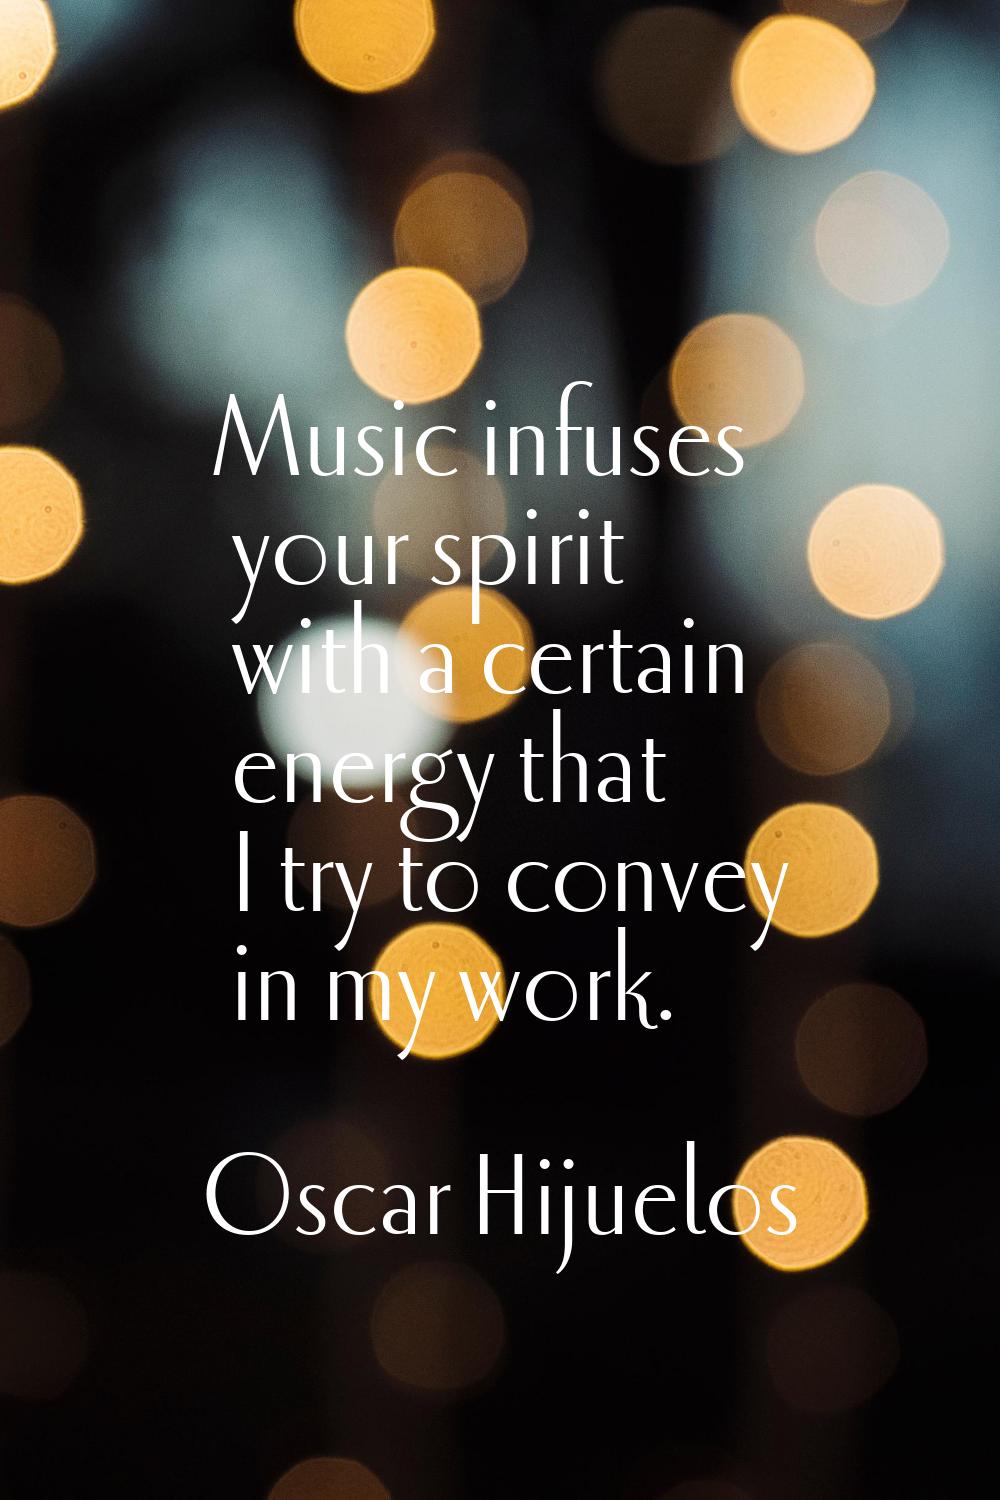 Music infuses your spirit with a certain energy that I try to convey in my work.